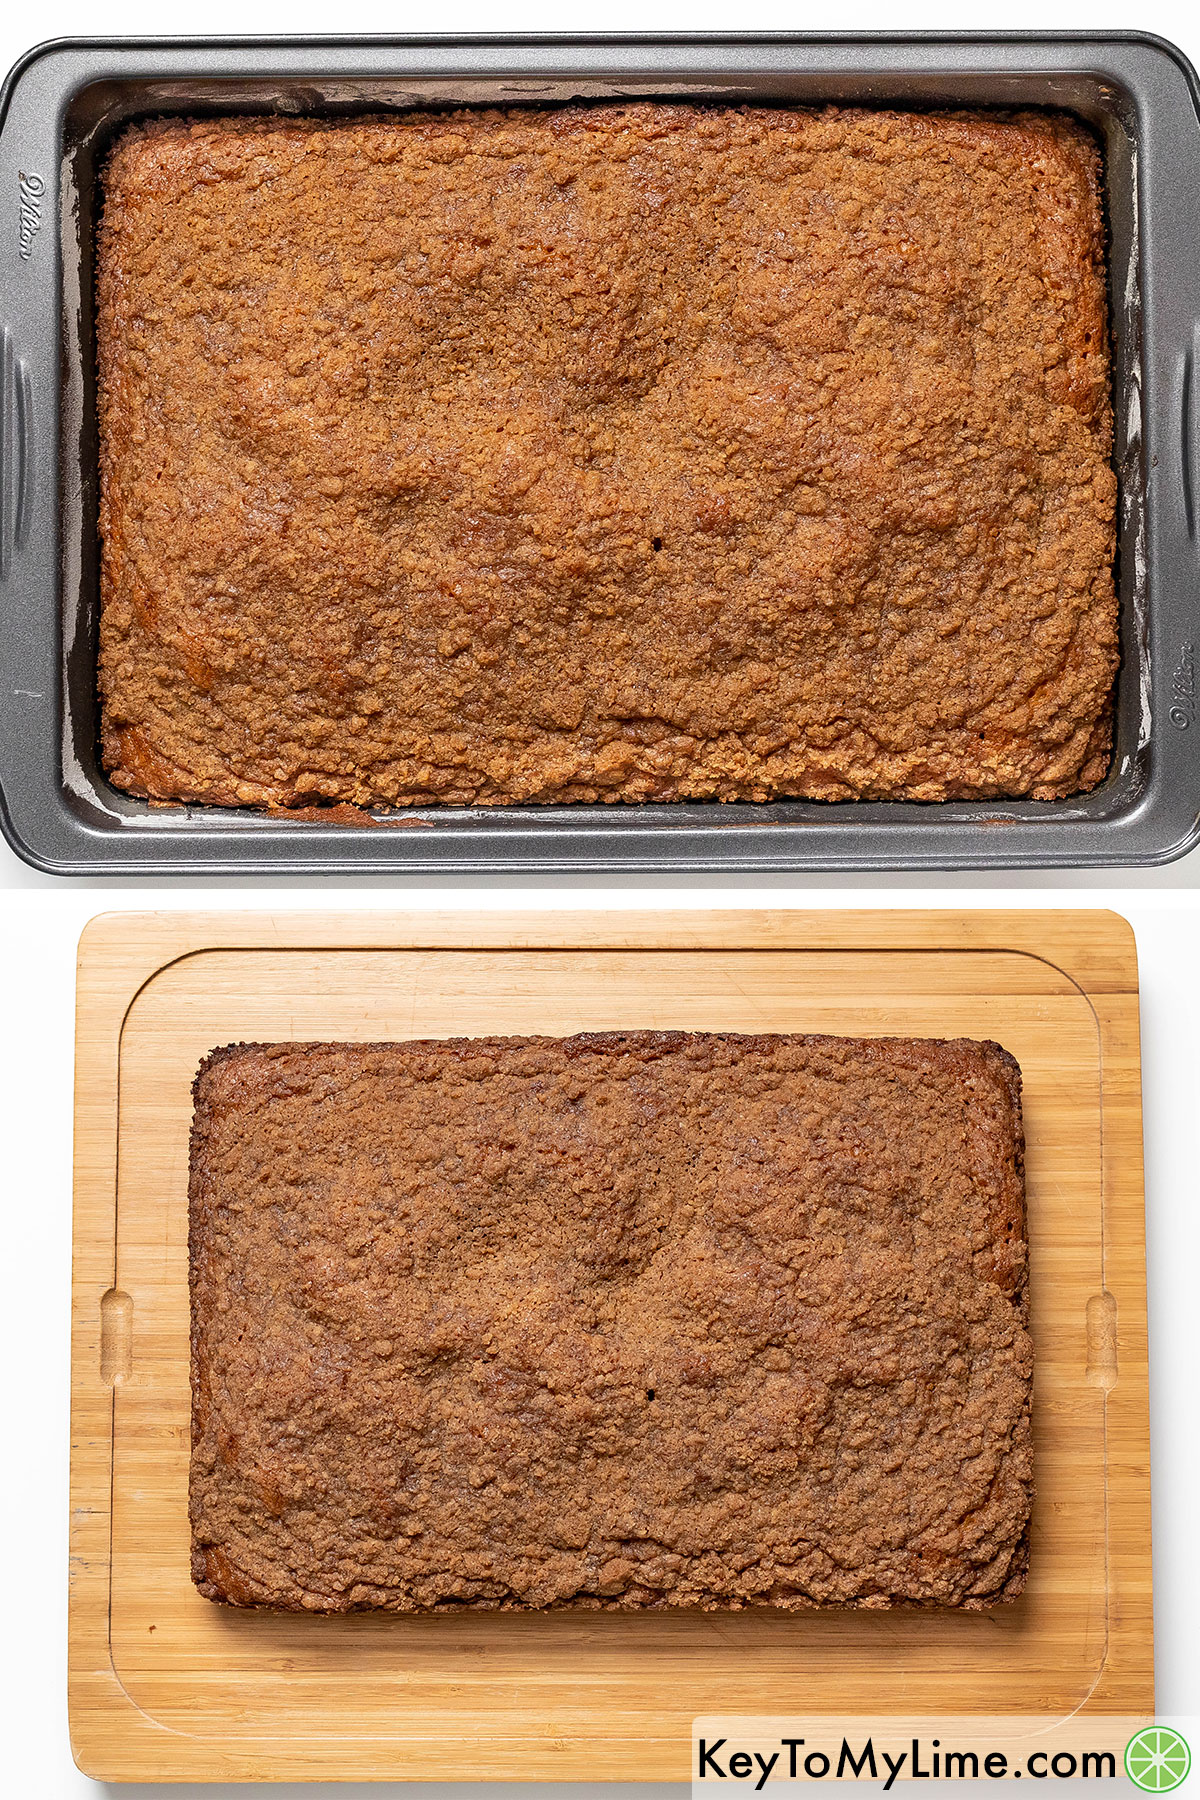 Removing the coffee cake from the bake pan and cooling on a cutting board.